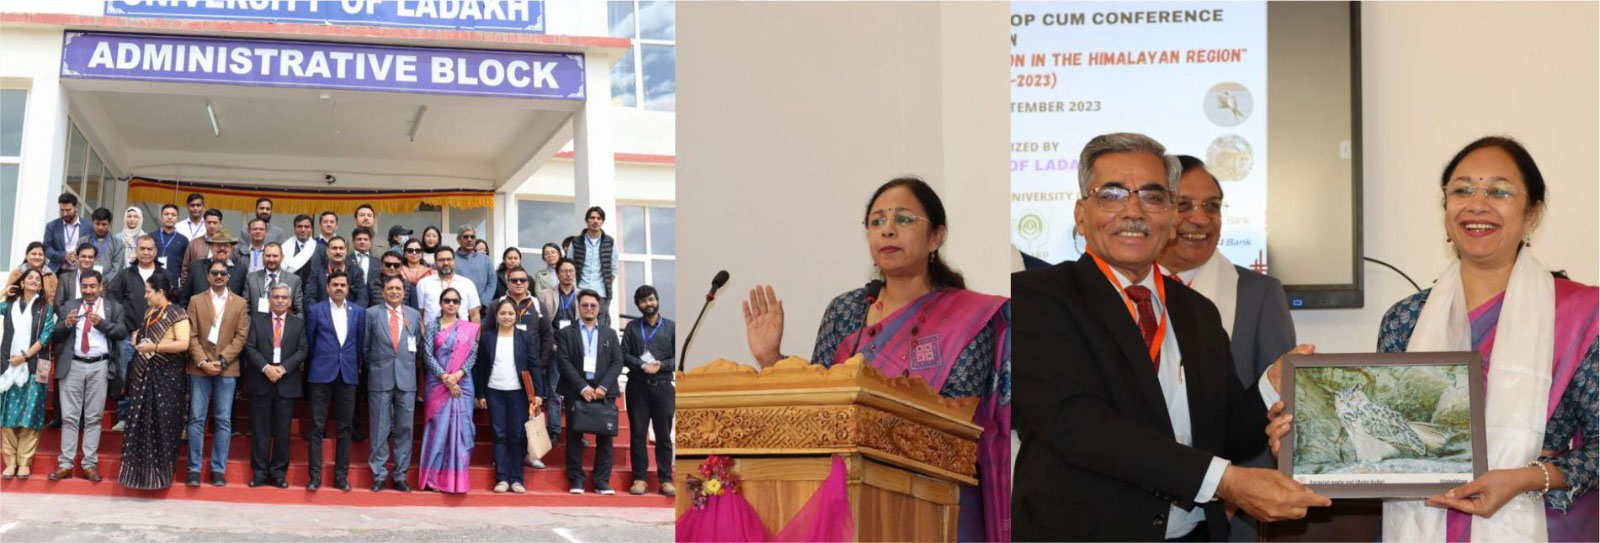 National Workshop cum Conference on Biodiversity and Conservation in the Himalayan Region'-Chitkara University